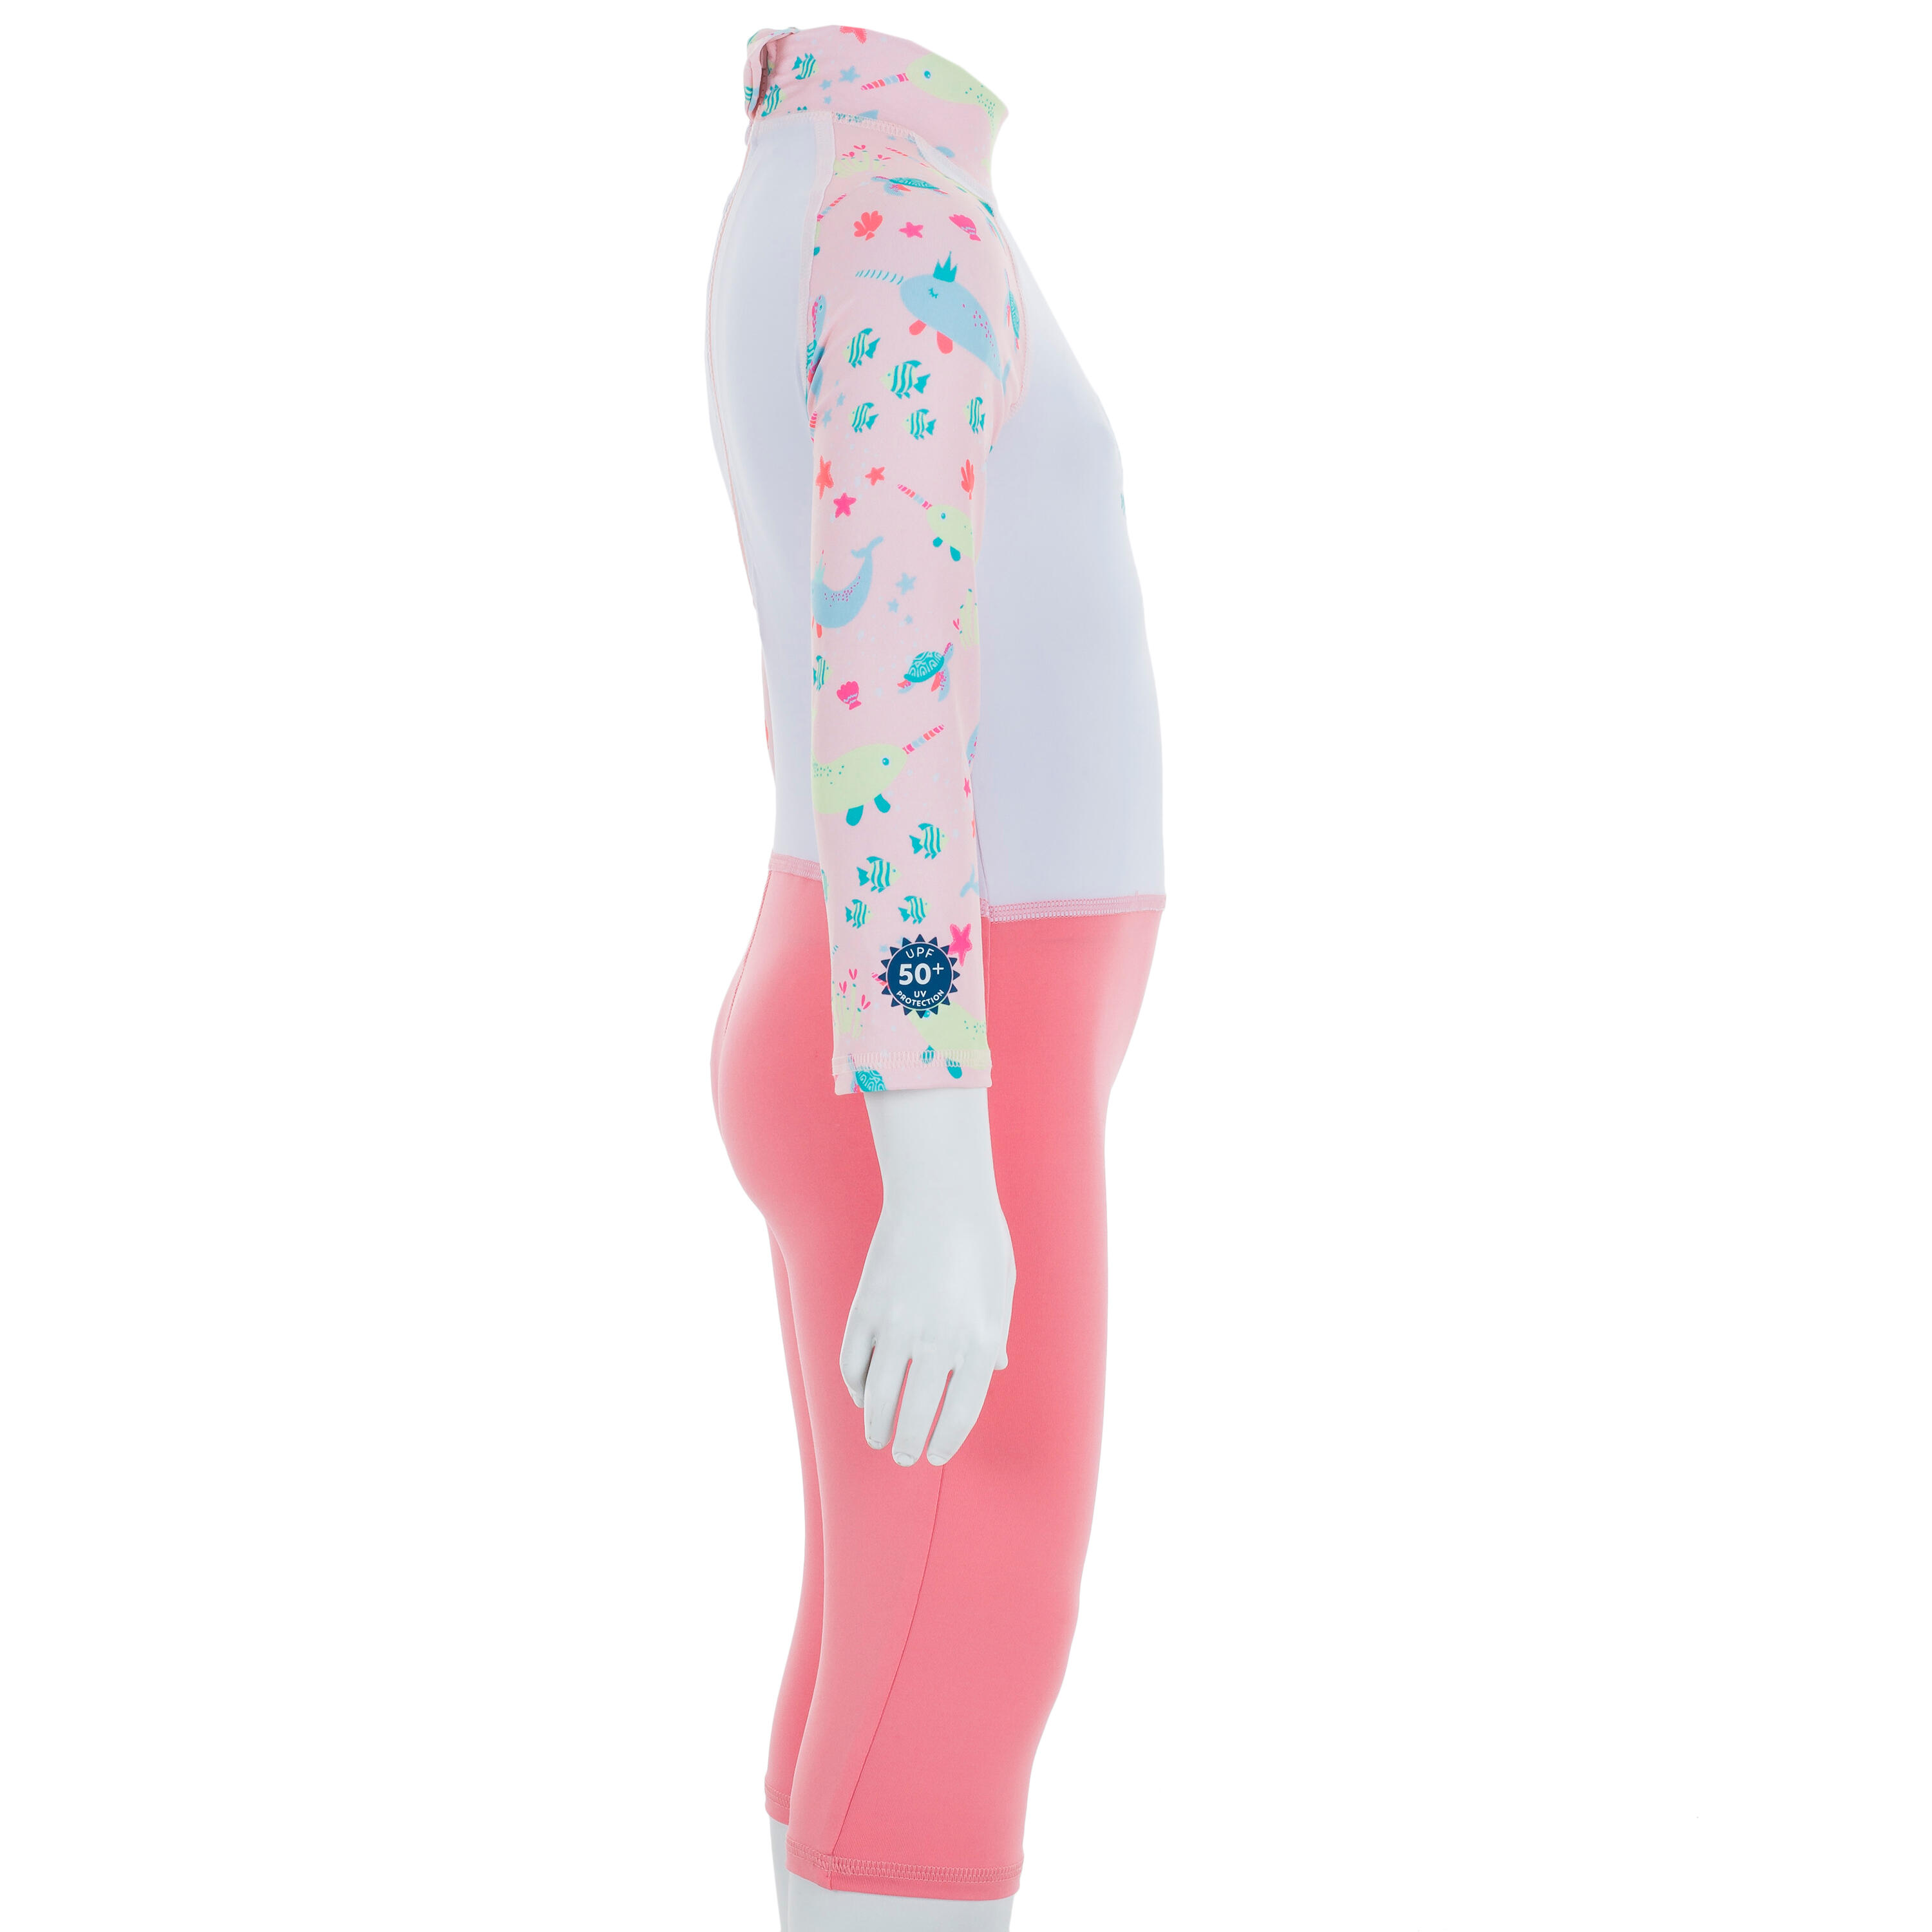 Baby / Kids' Swimming Long Sleeve UV-Protection Suit - Pink Print 5/8